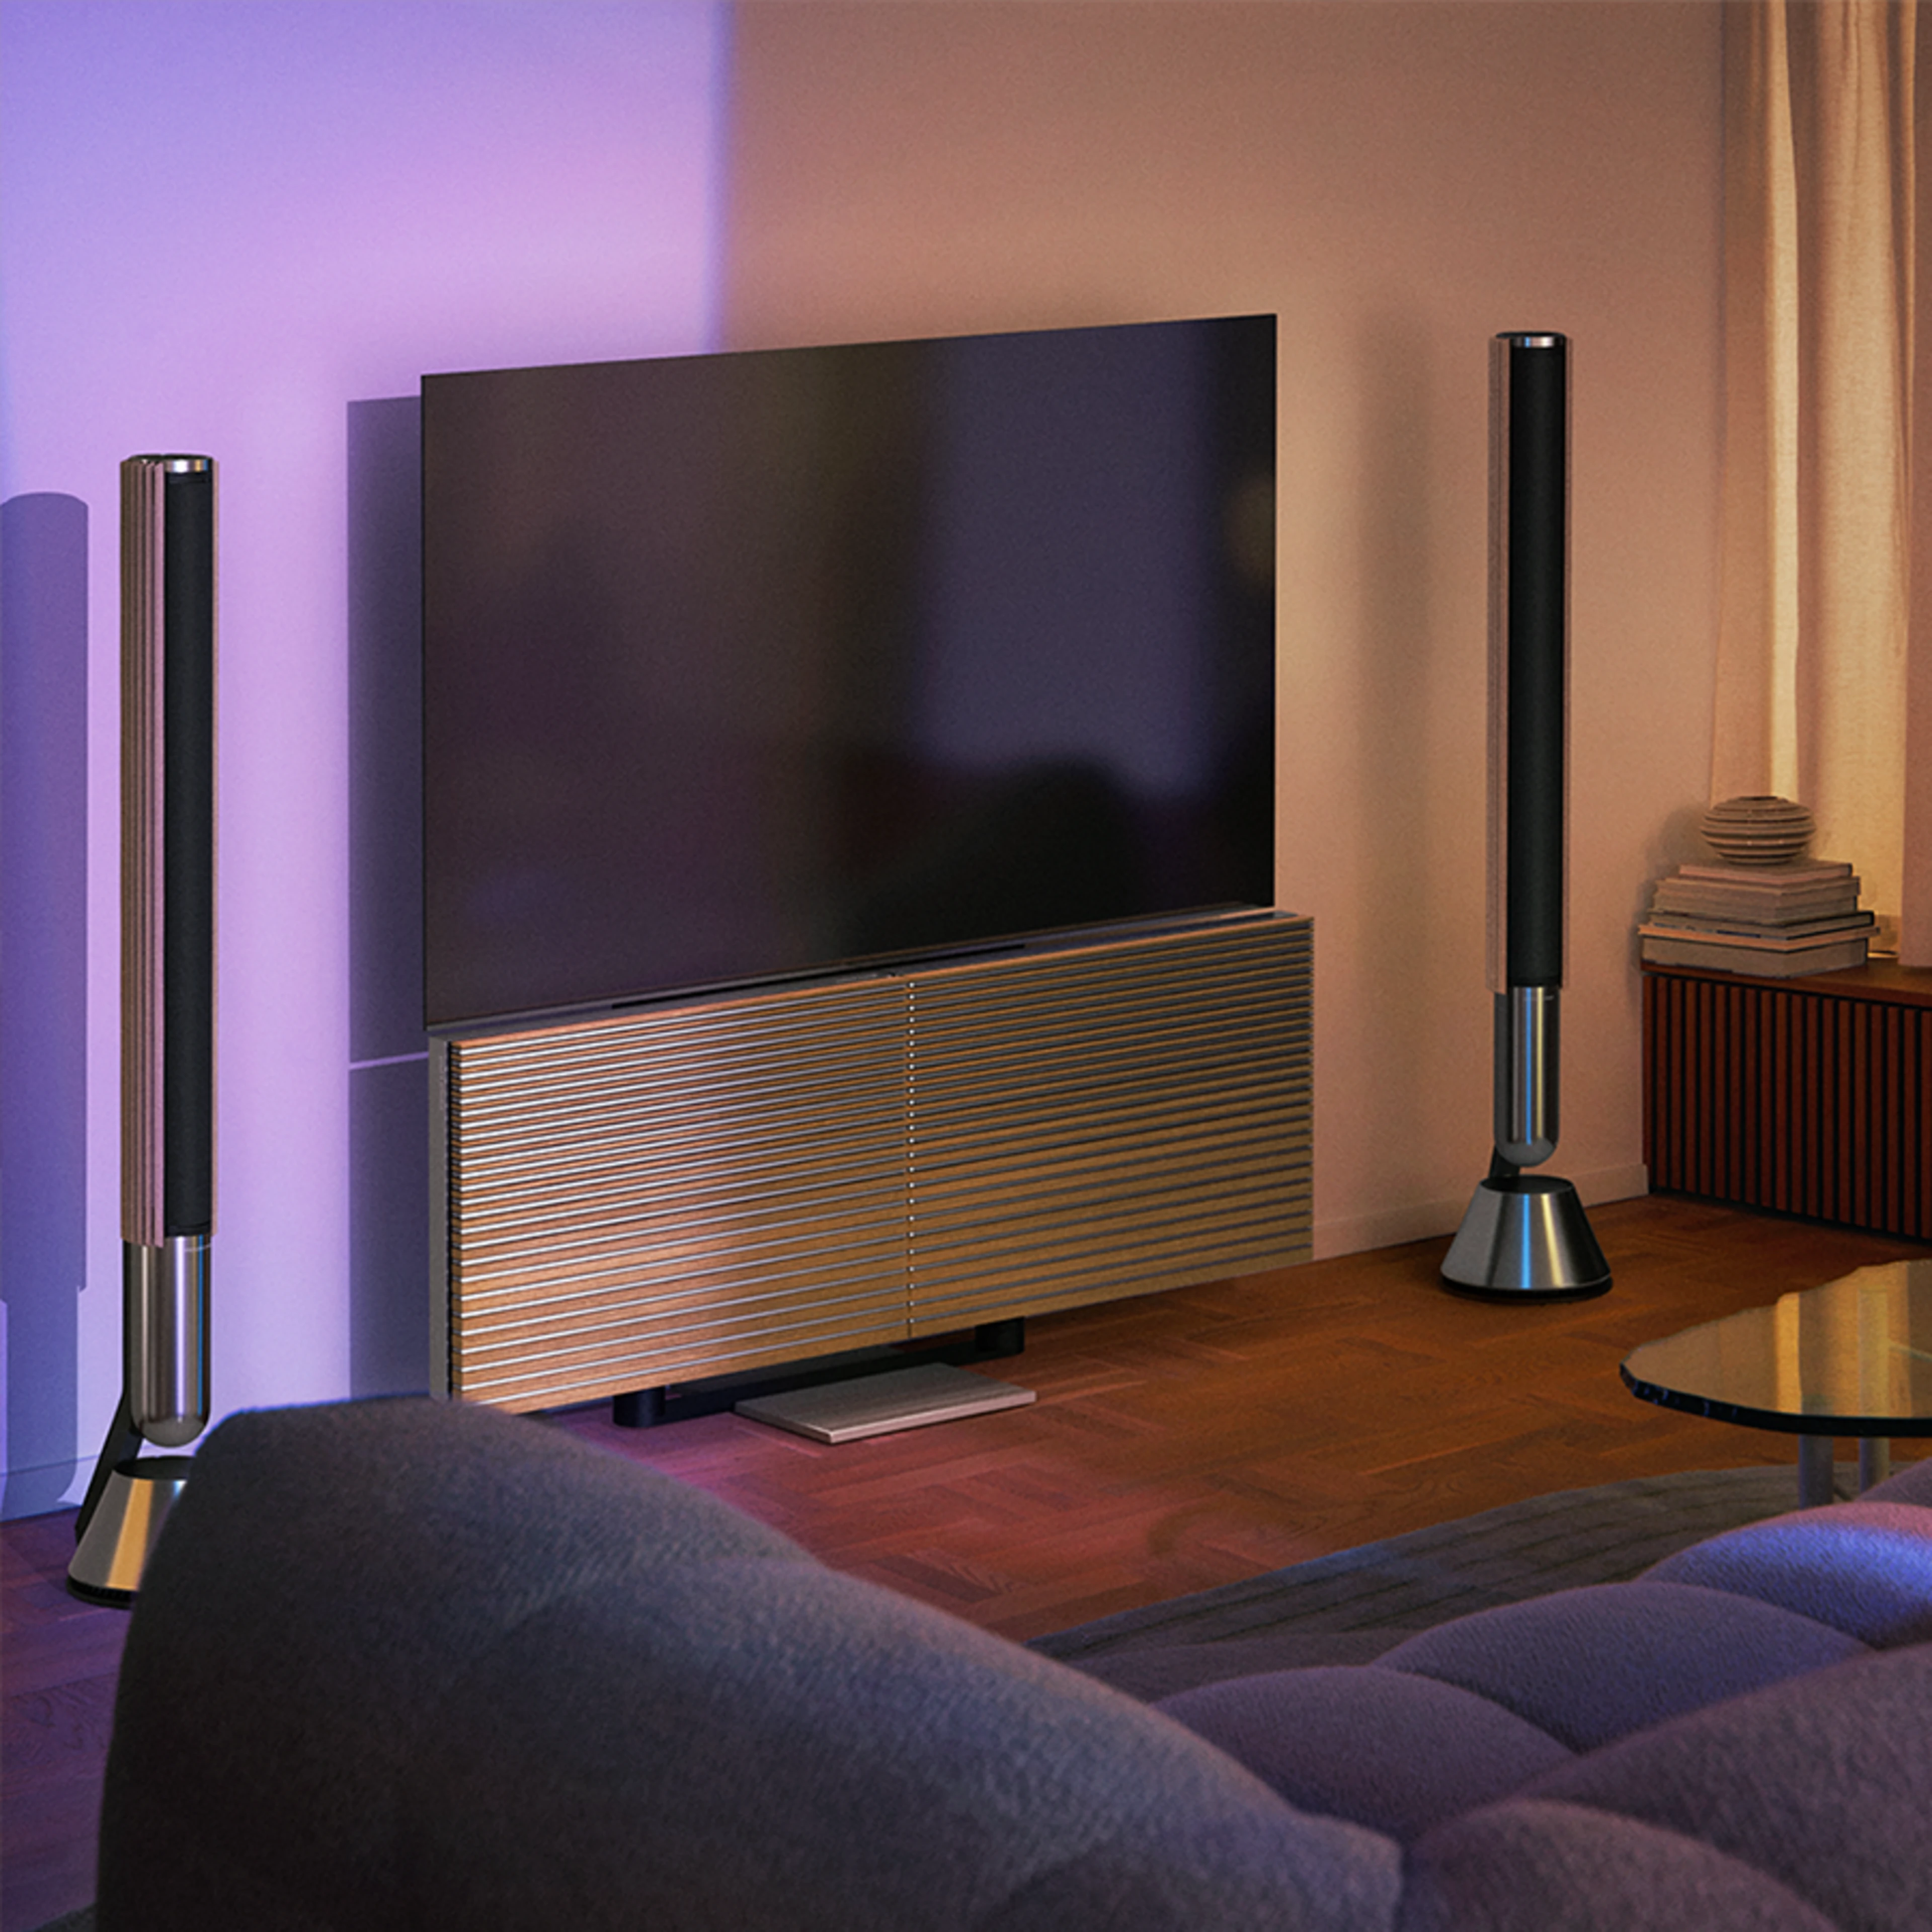 Beolab 28 & Beovision Eclipse as a home theatre setup in a livingroom 